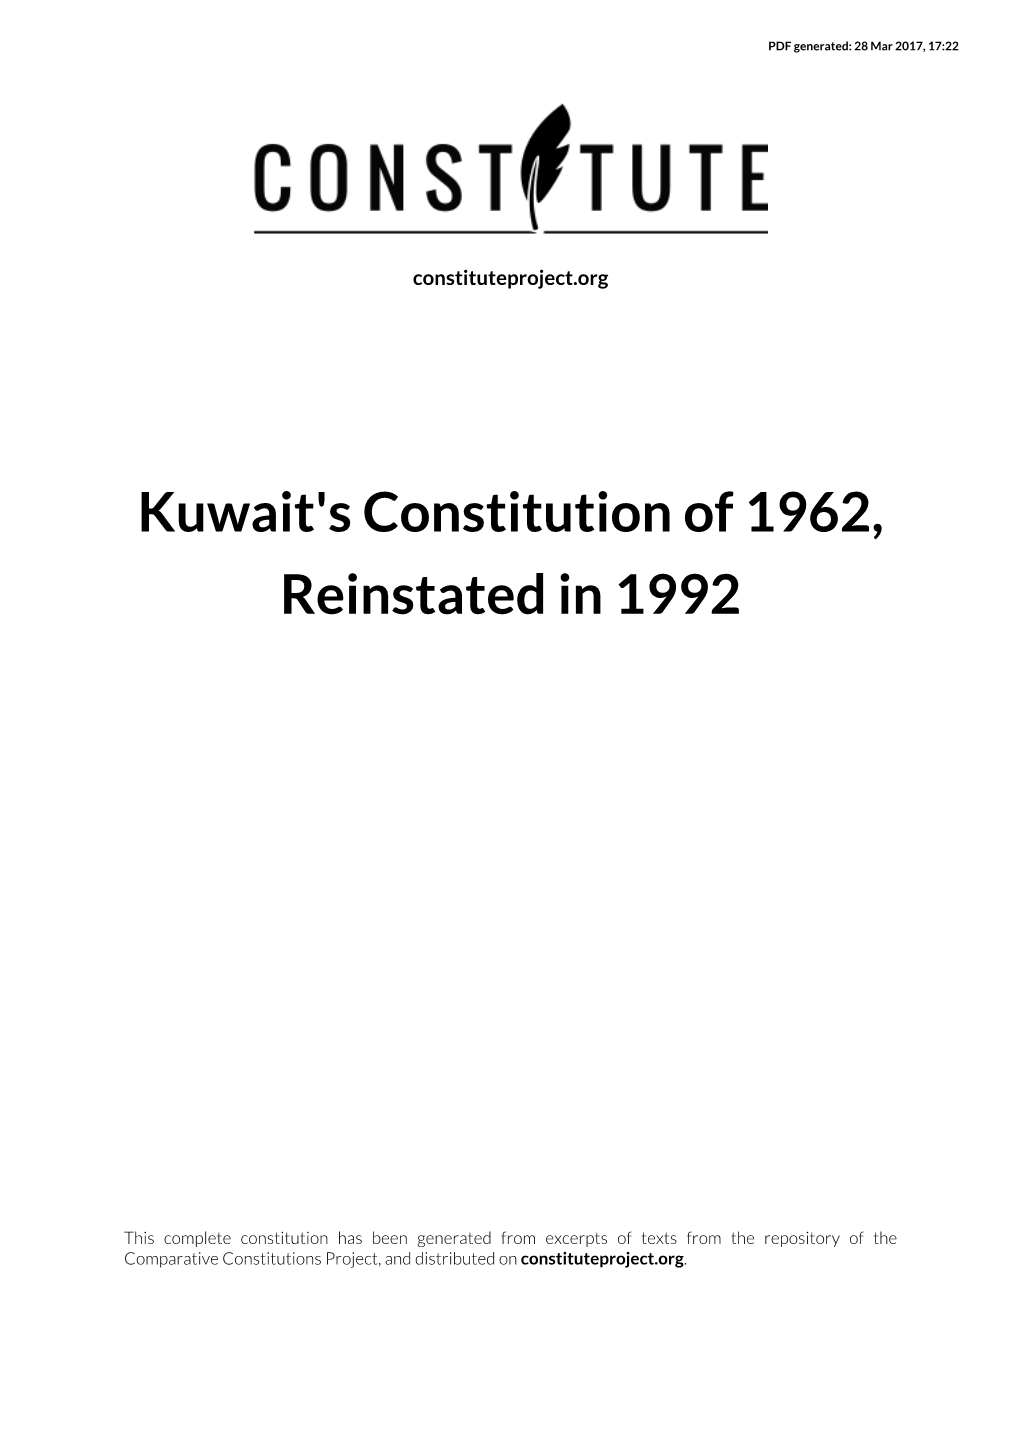 Kuwait's Constitution of 1962, Reinstated in 1992